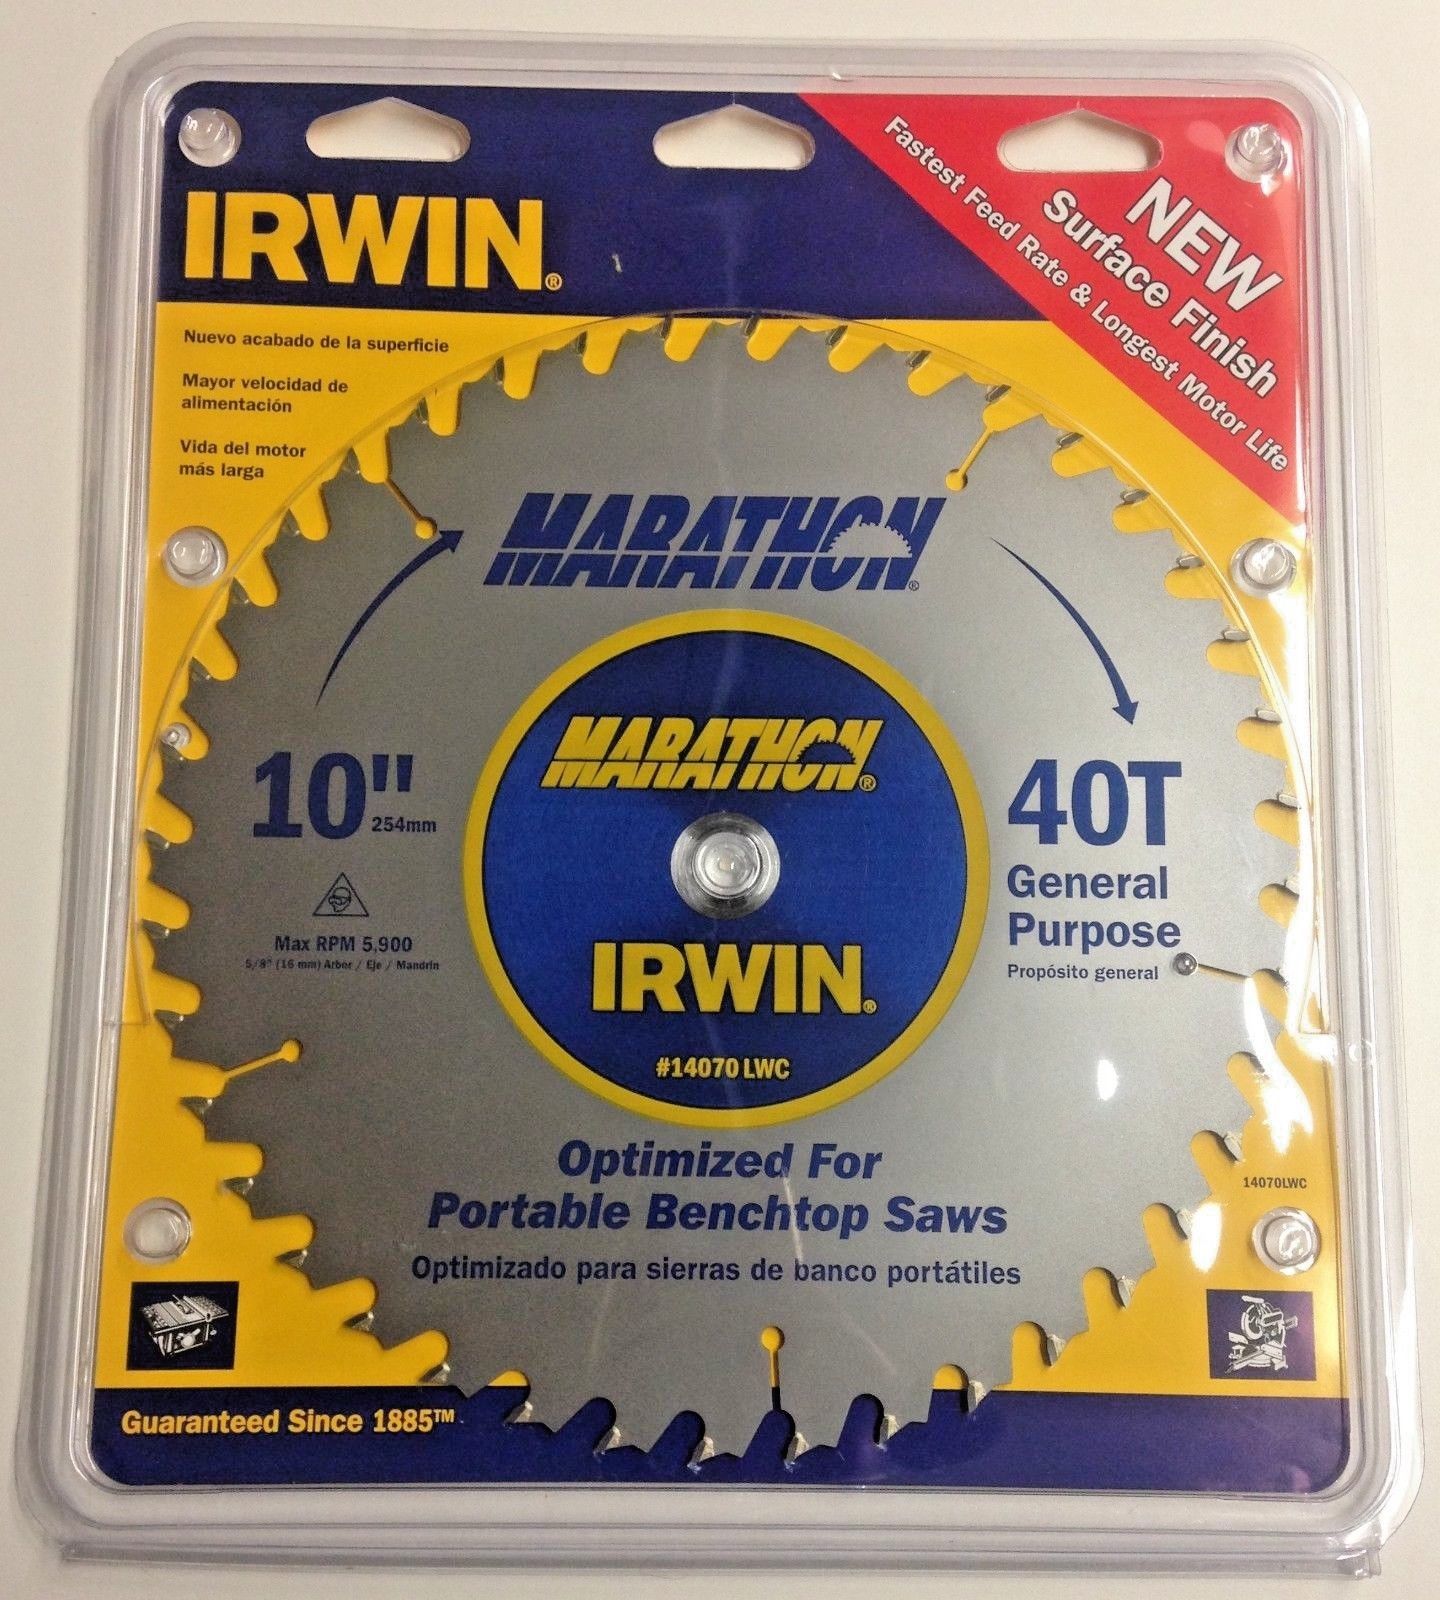 Irwin 14070LWC 10" x 40T General Purpose Carbide Saw Blade New Surface Finish